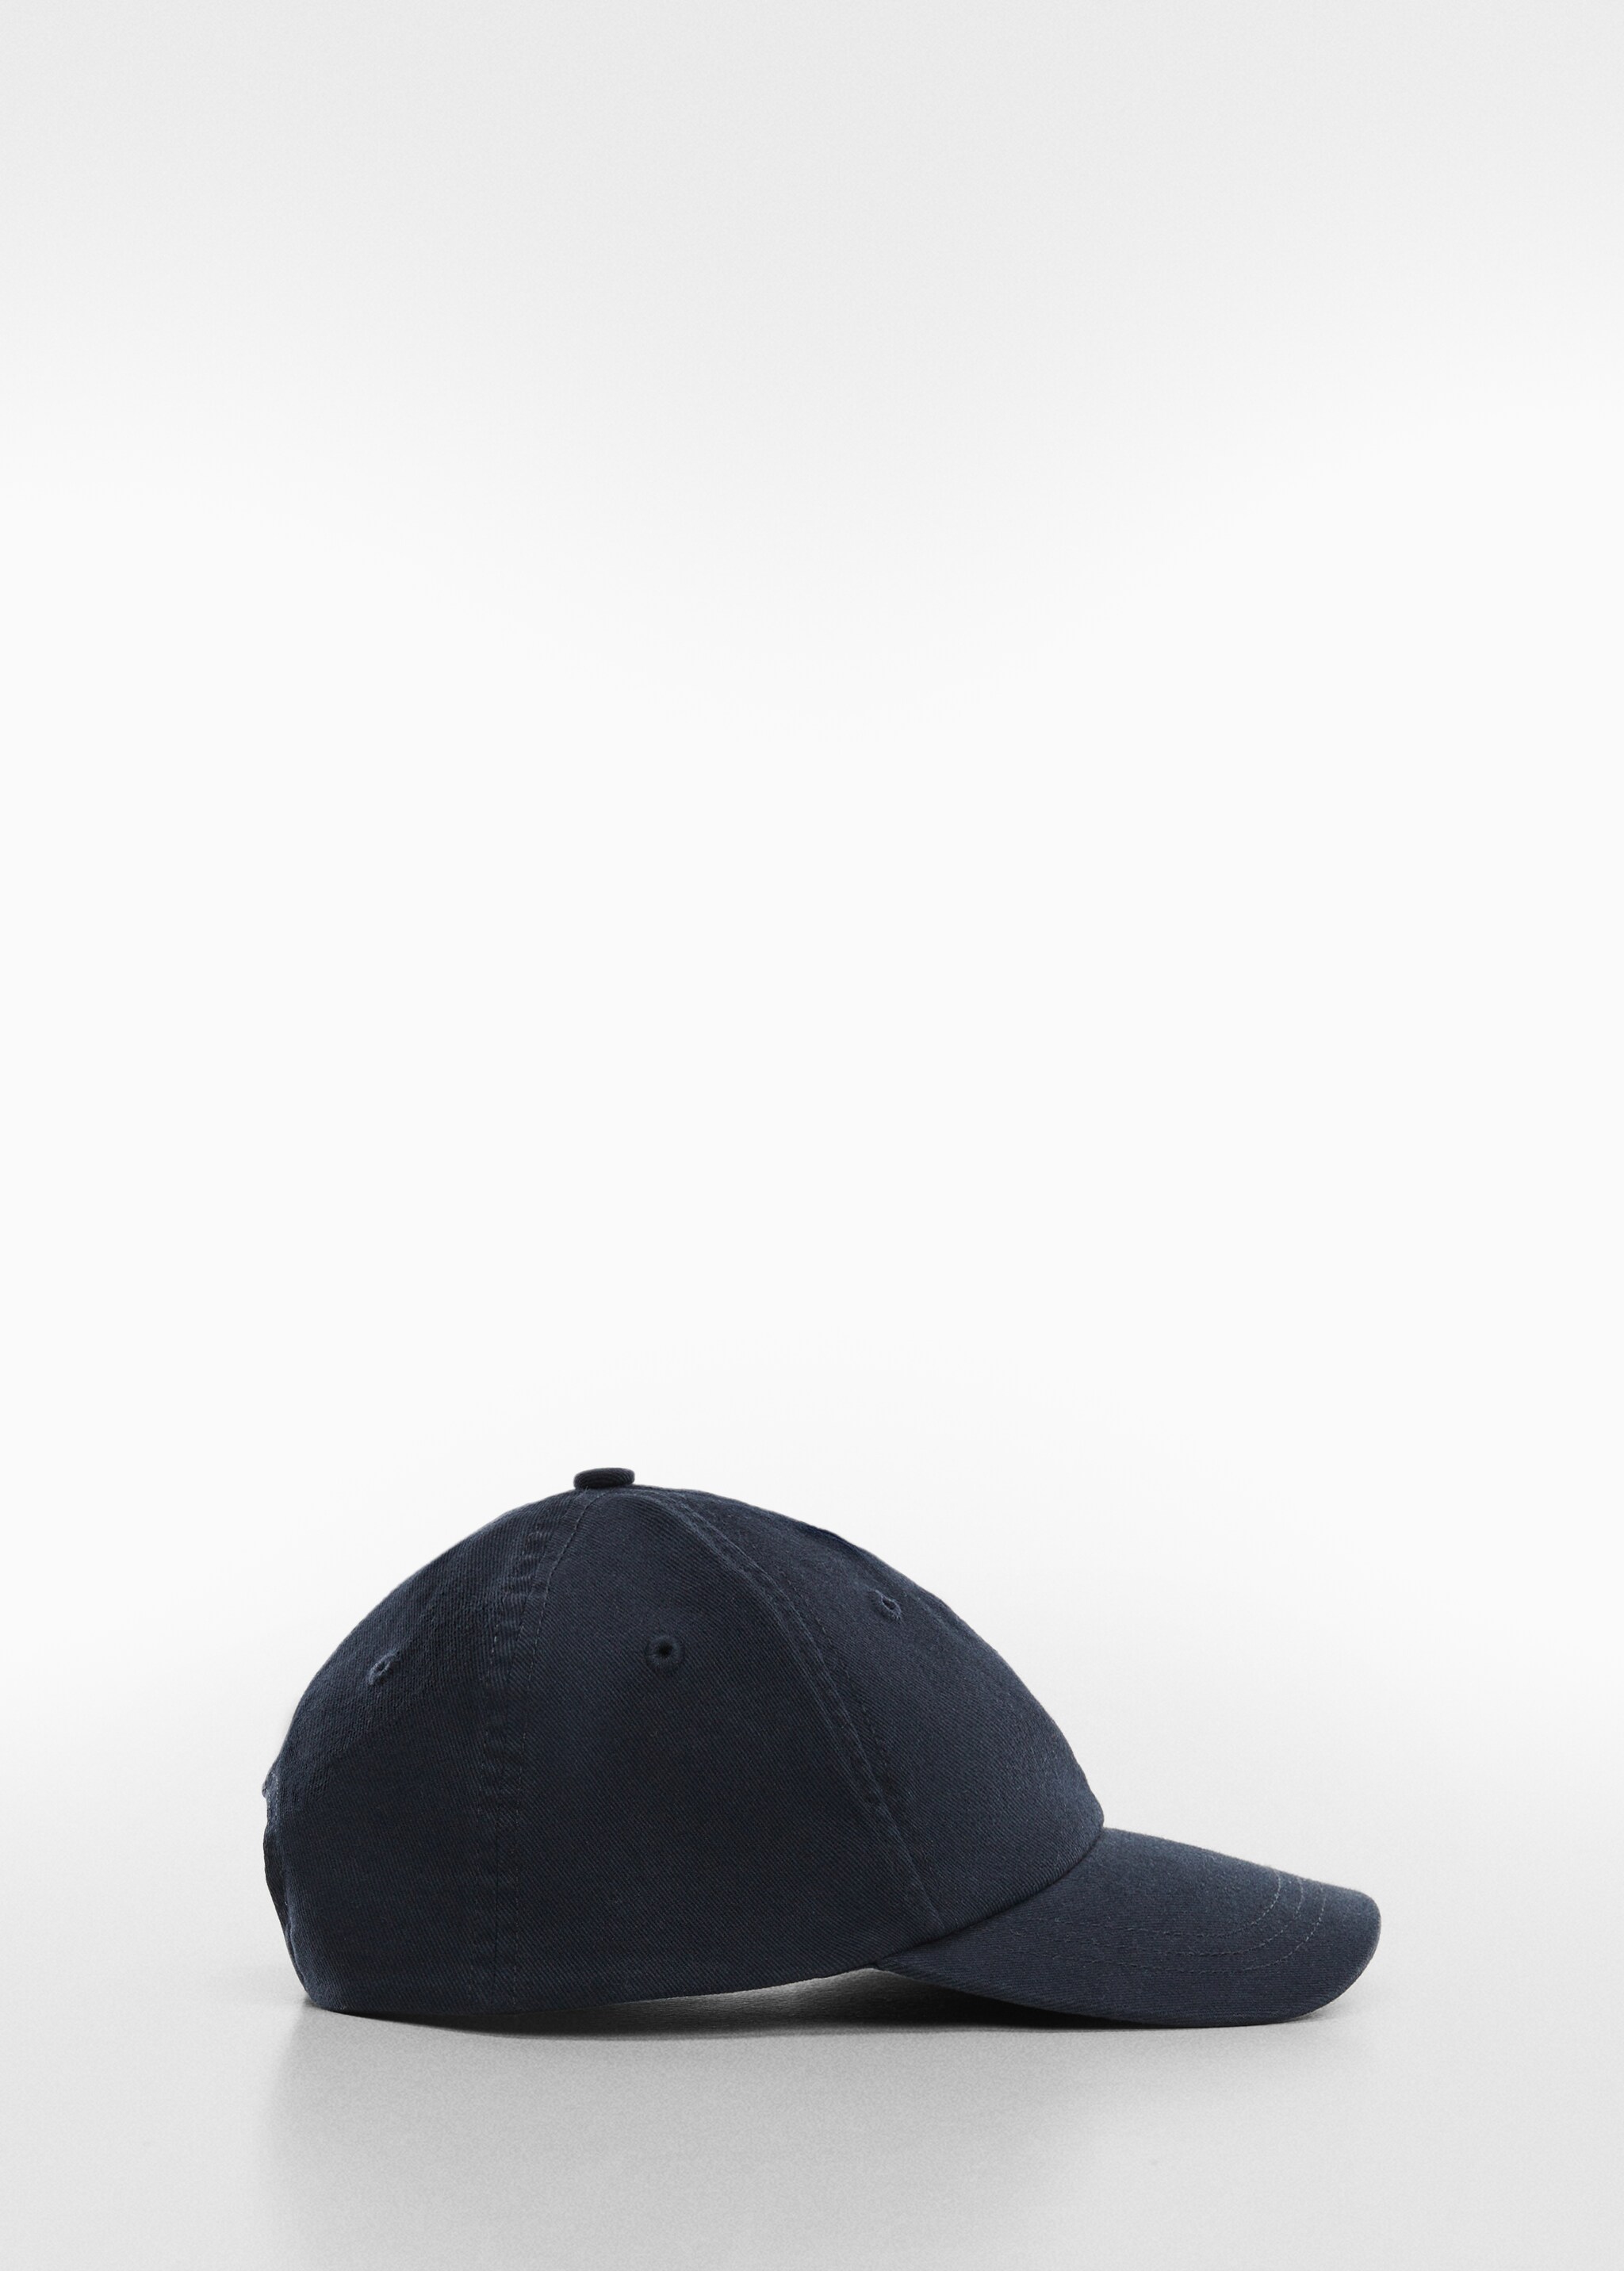 Organic cotton cap - Article without model